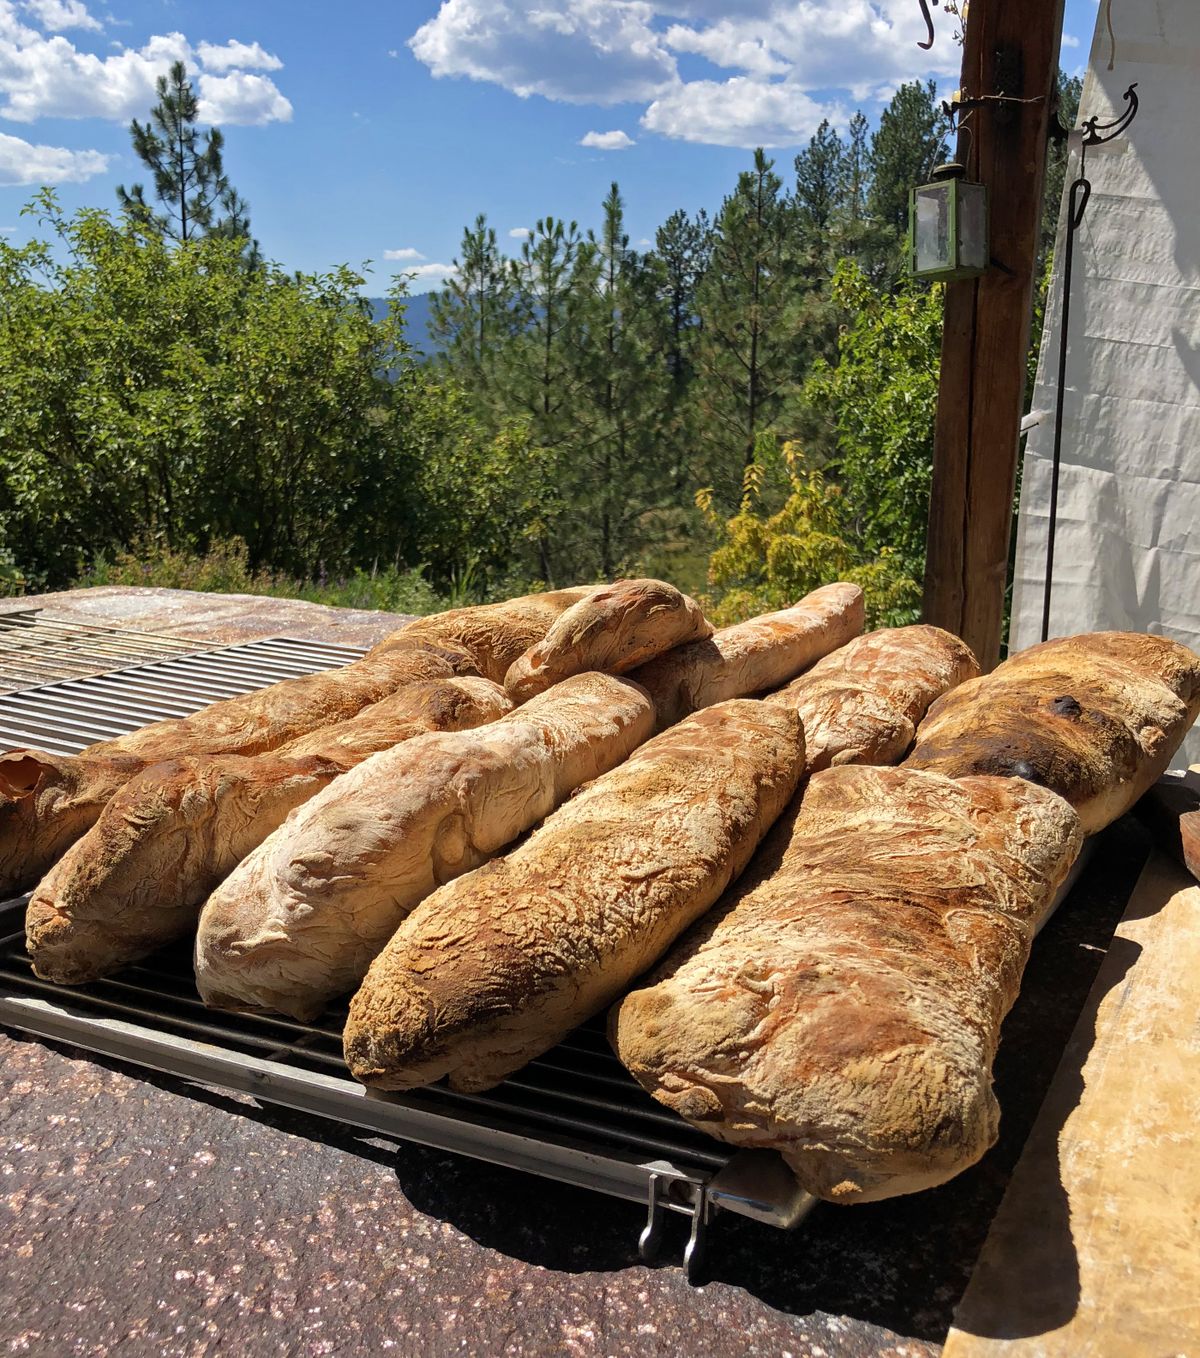 Ciabatta bread is just out of the wood-fired oven at Quillisascut Farm. (Leslie Kelly)